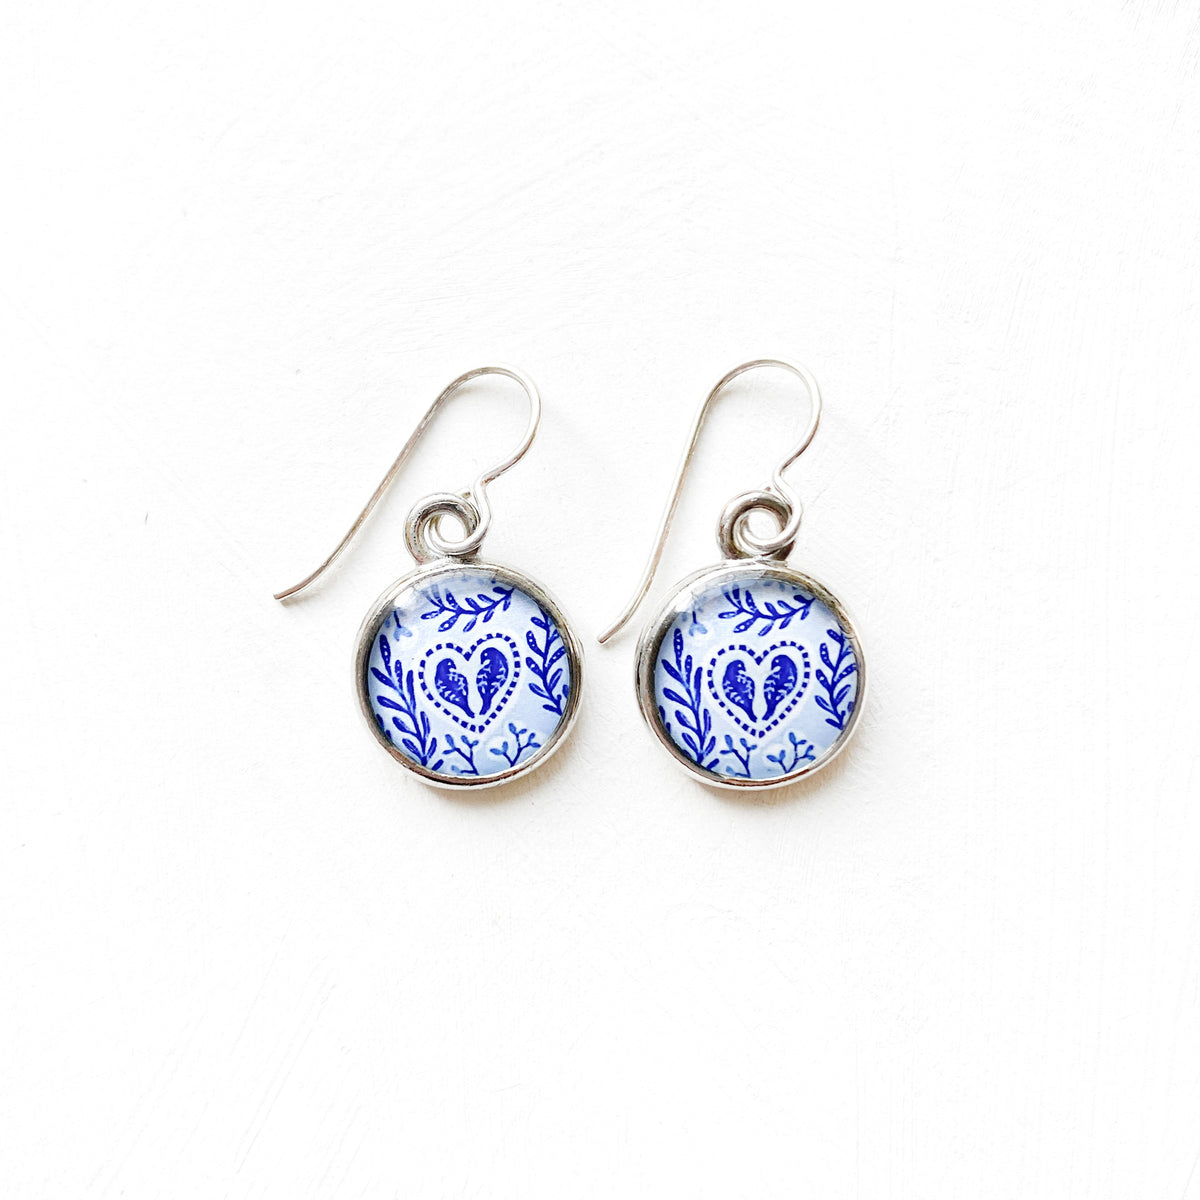 a pair of blue and white porcelain earrings